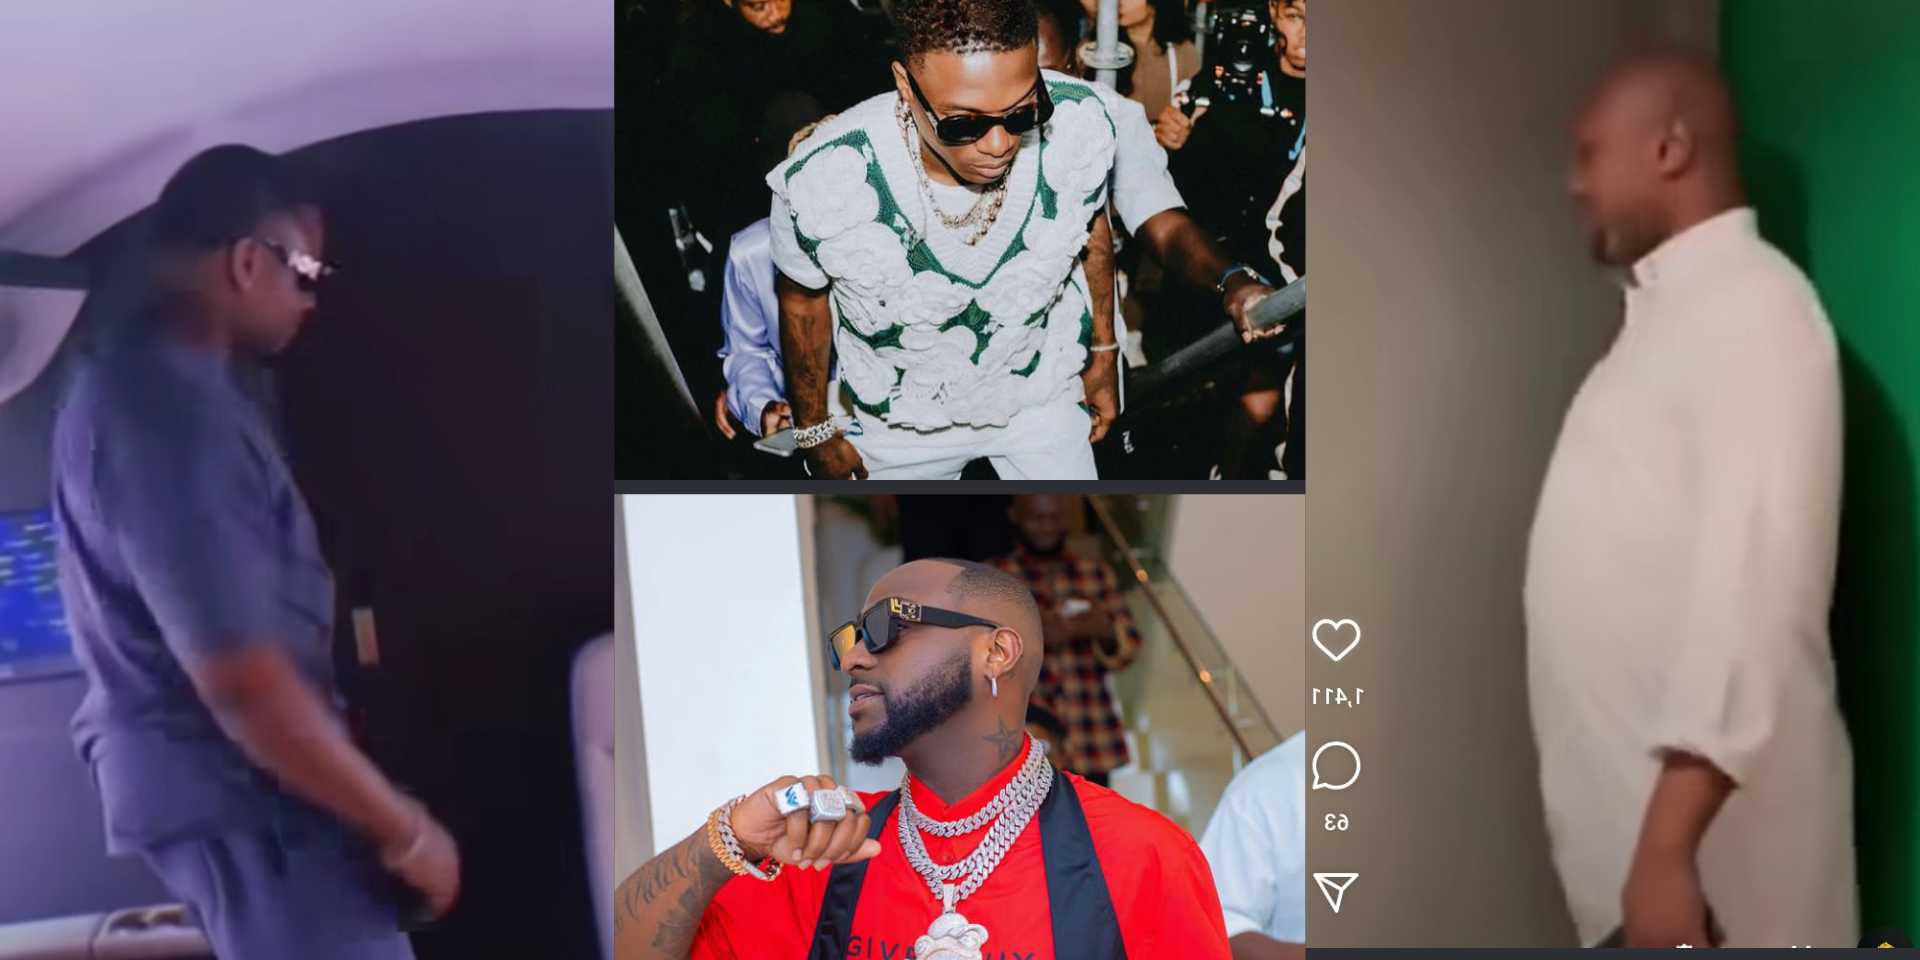 "Israel DMW does it better" - Reactions as DJ Tunez mimics Davido's aide while praising Wizkid [Video]